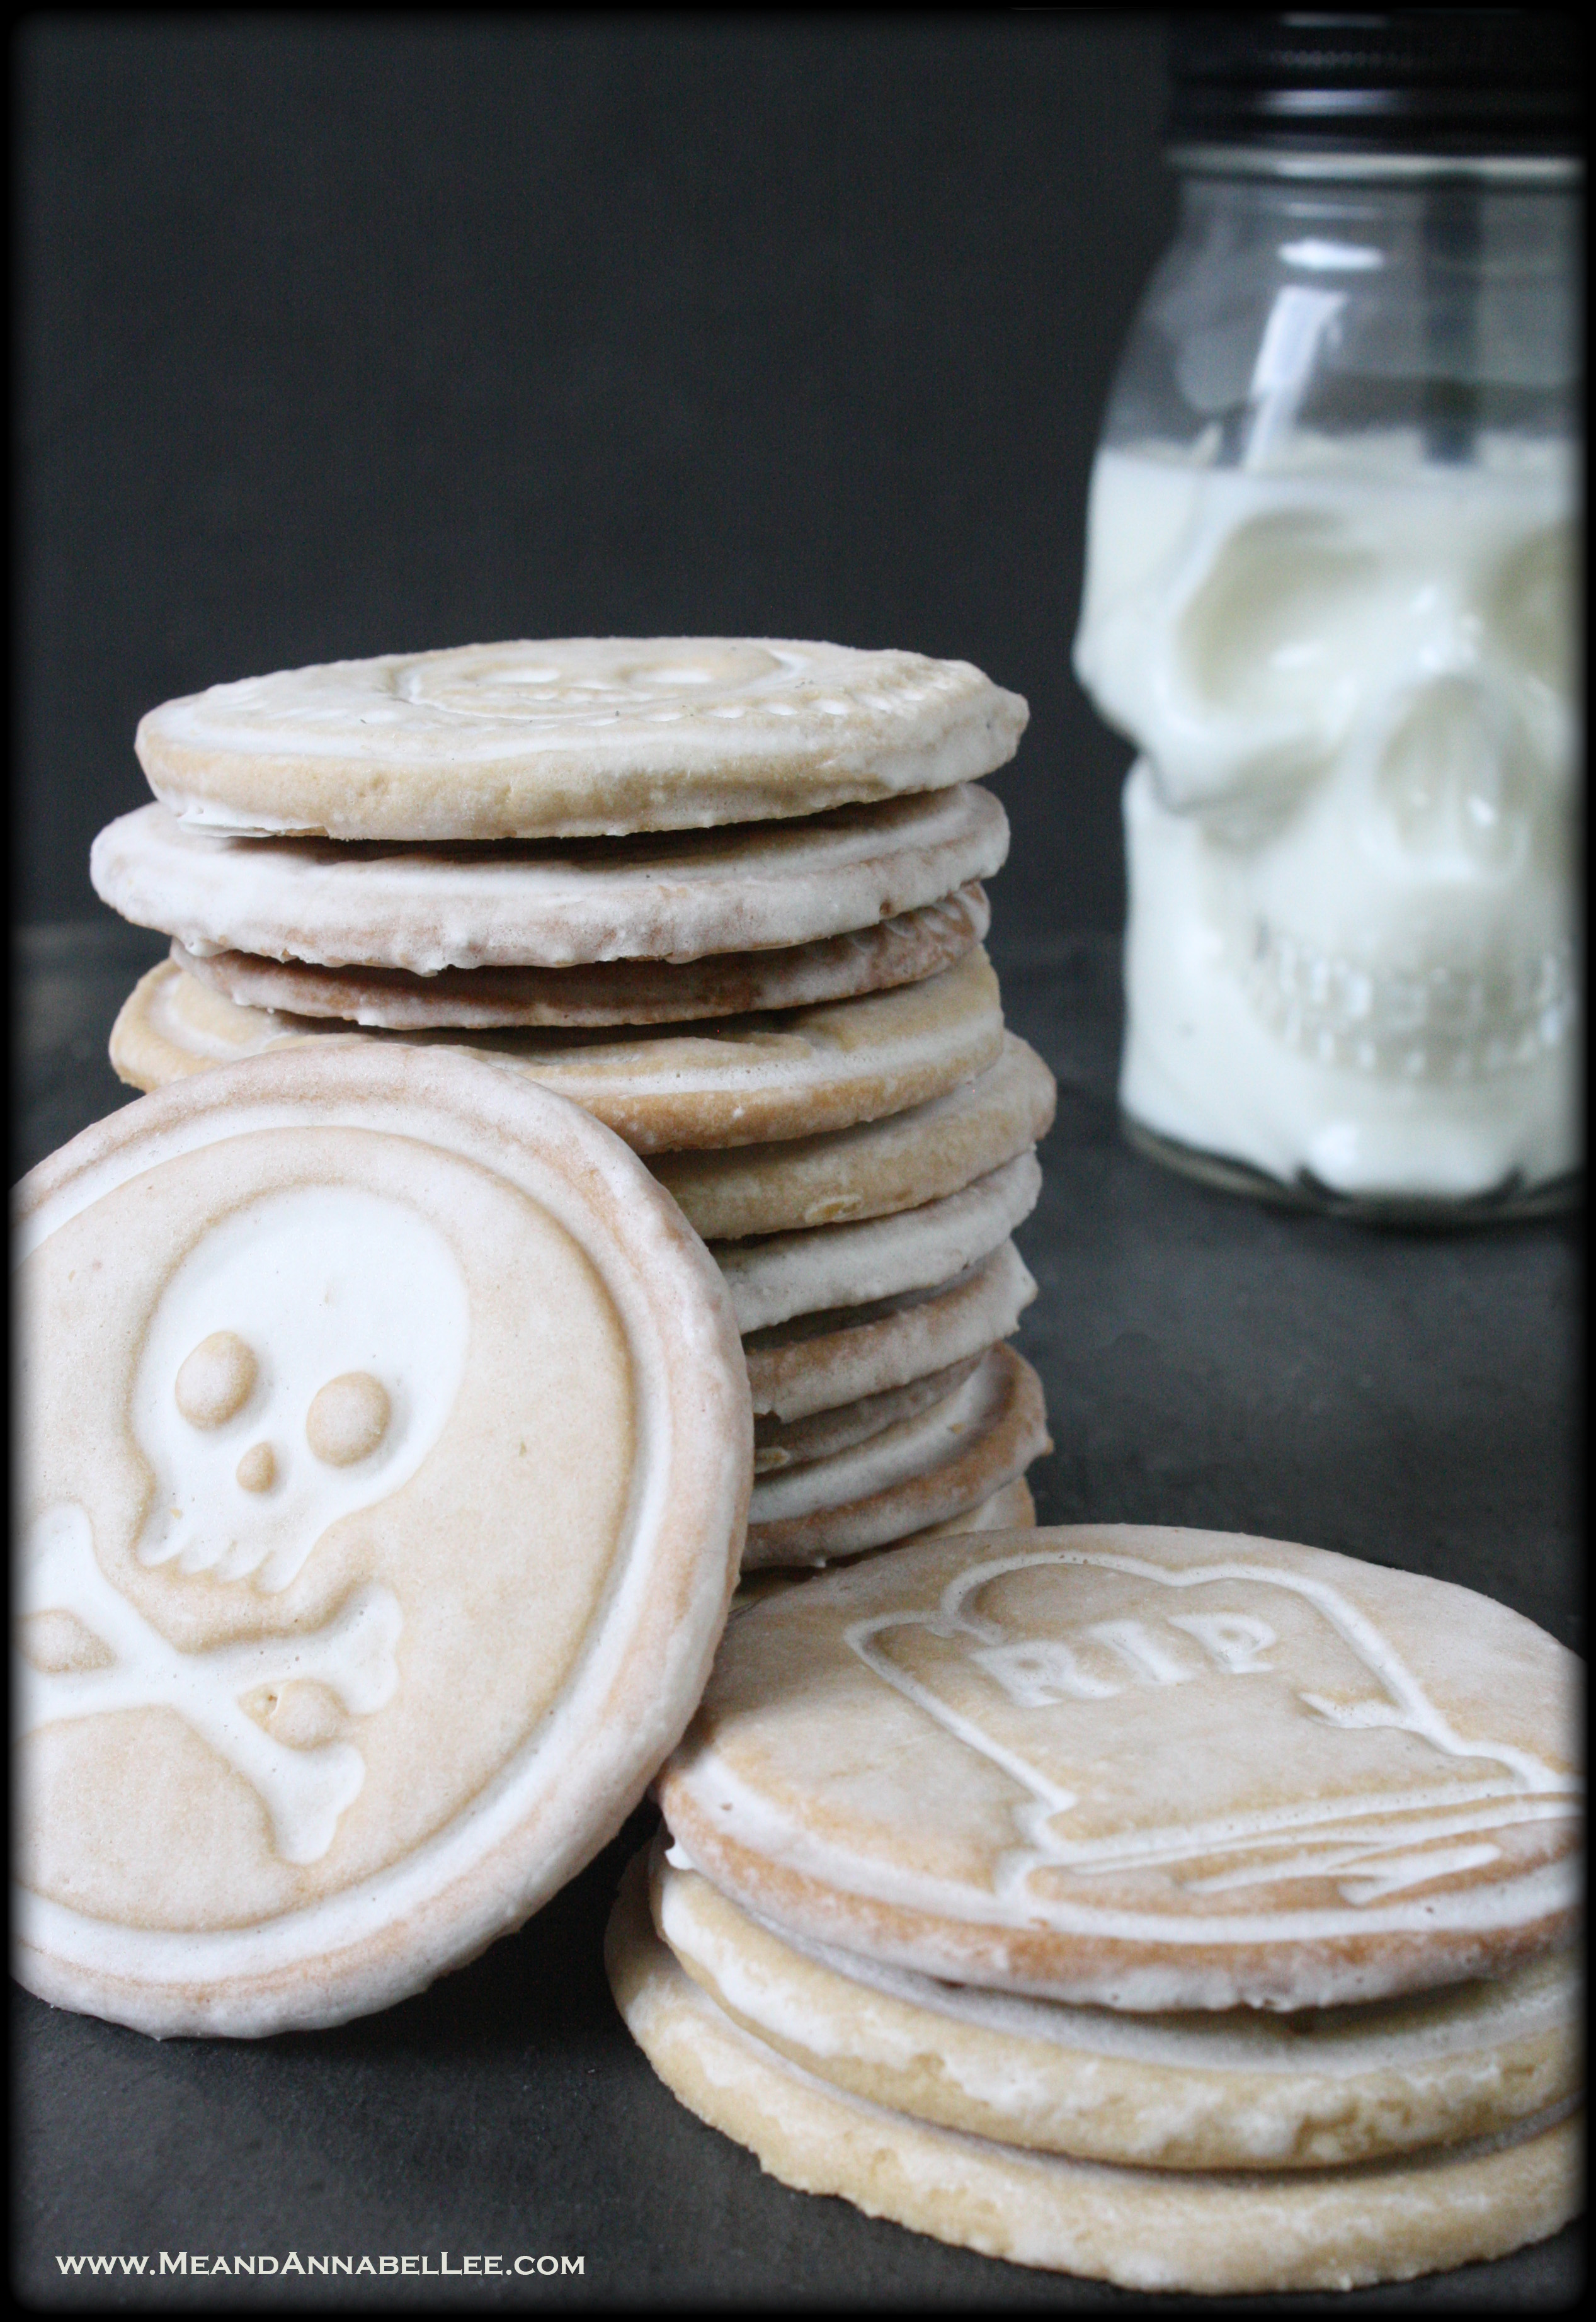 Halloween Stamped Cookies | Rest in Peace | Skull Stamps | Almond Vanilla Sugar Cookie Recipe | Royal Flood Icing | www.MeandAnnabelLee.com